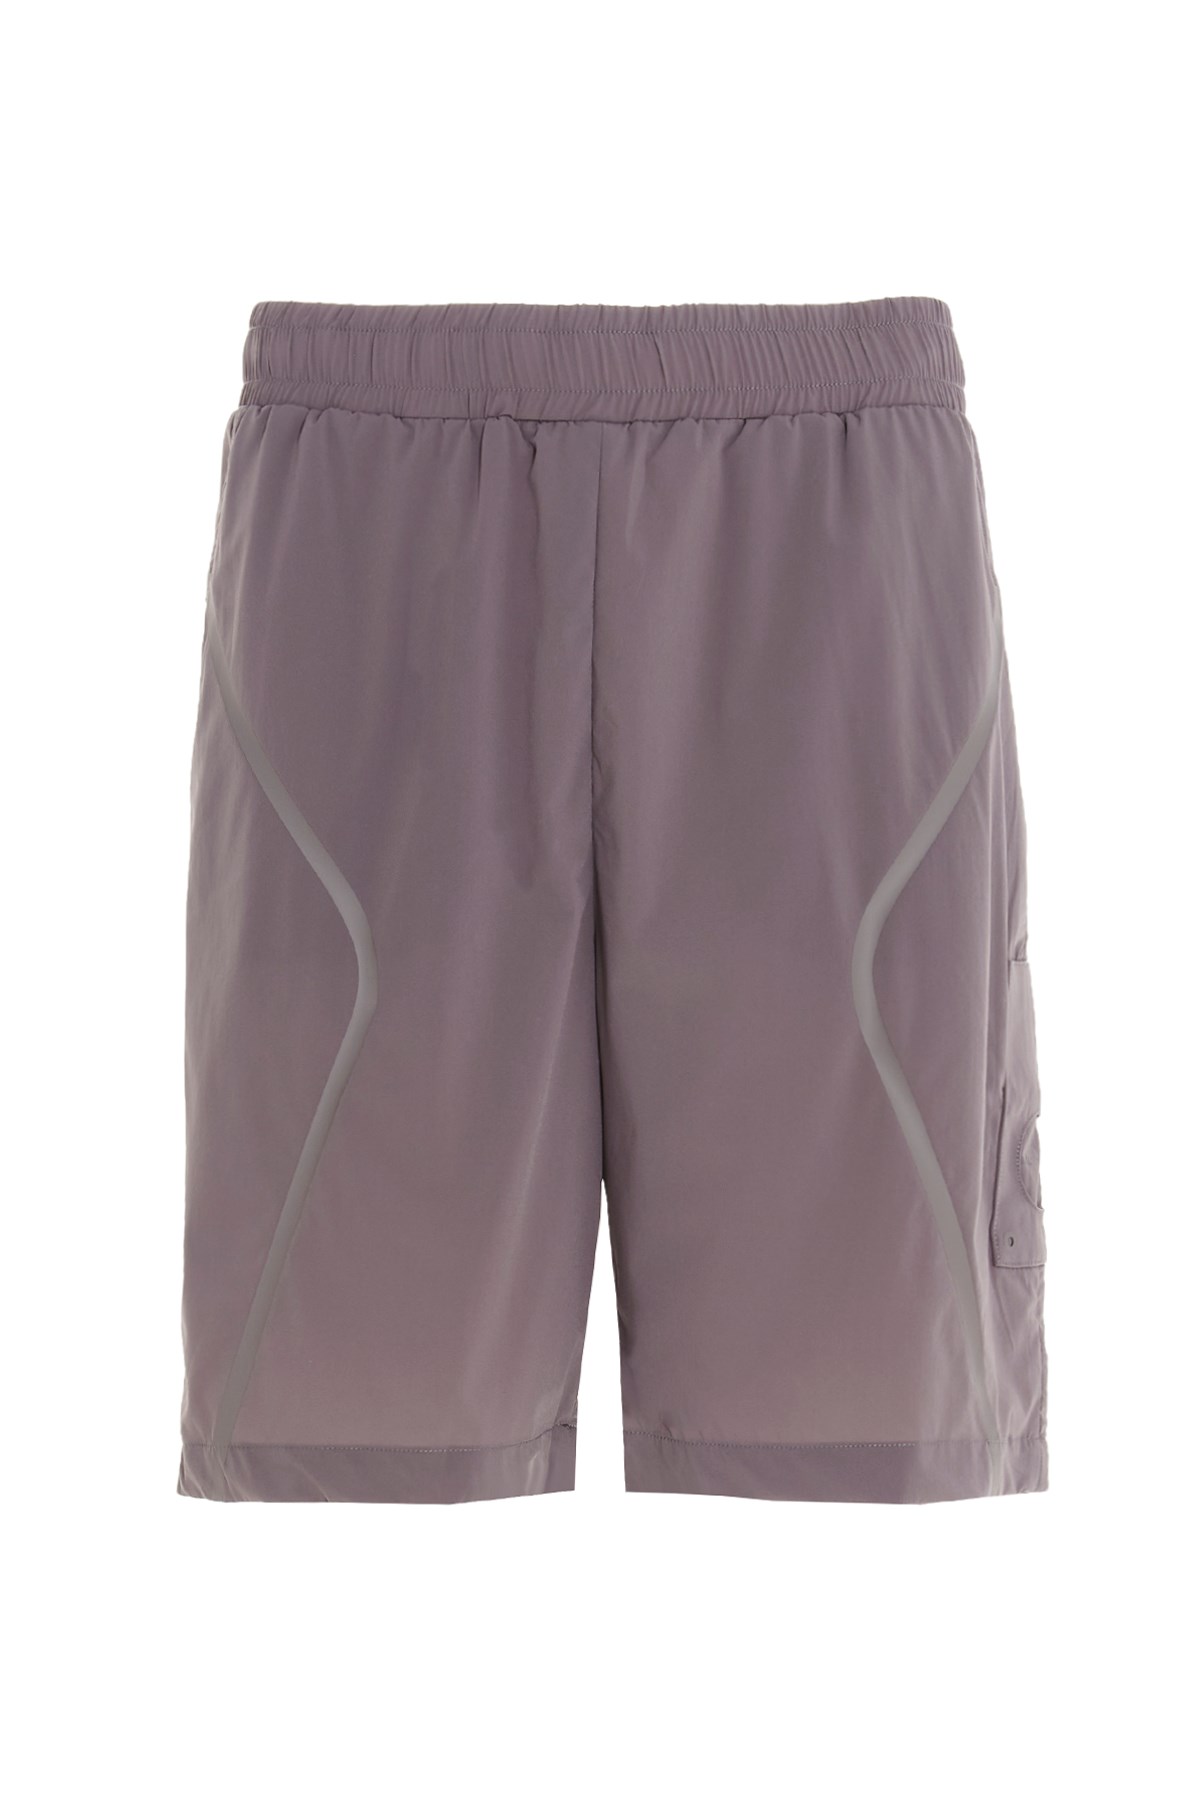 A-COLD-WALL* 'Welded’ Bermuda Shorts